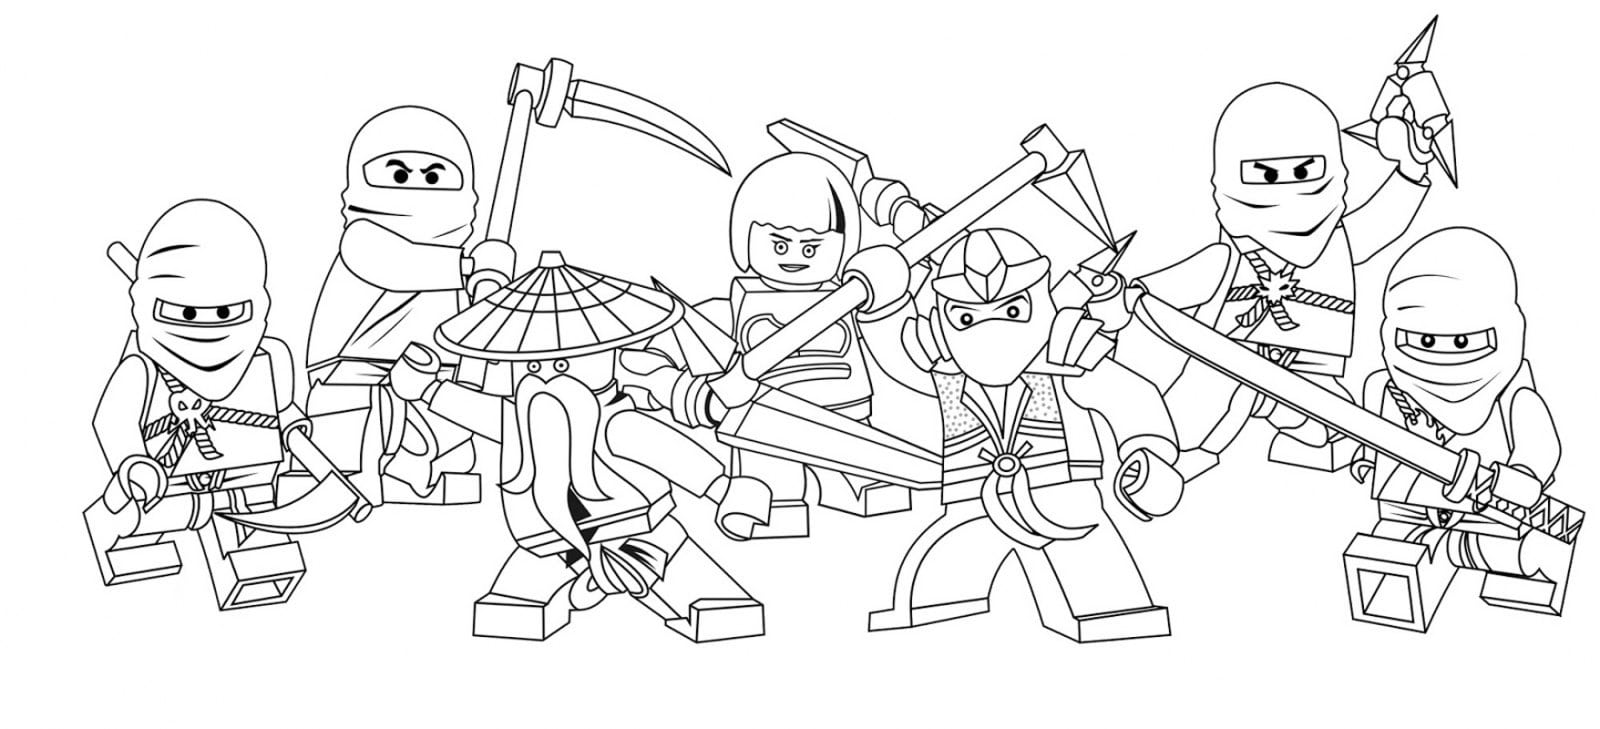 Lego Batman For Colorir Colouring Pages Coloring Pages For Girls 5